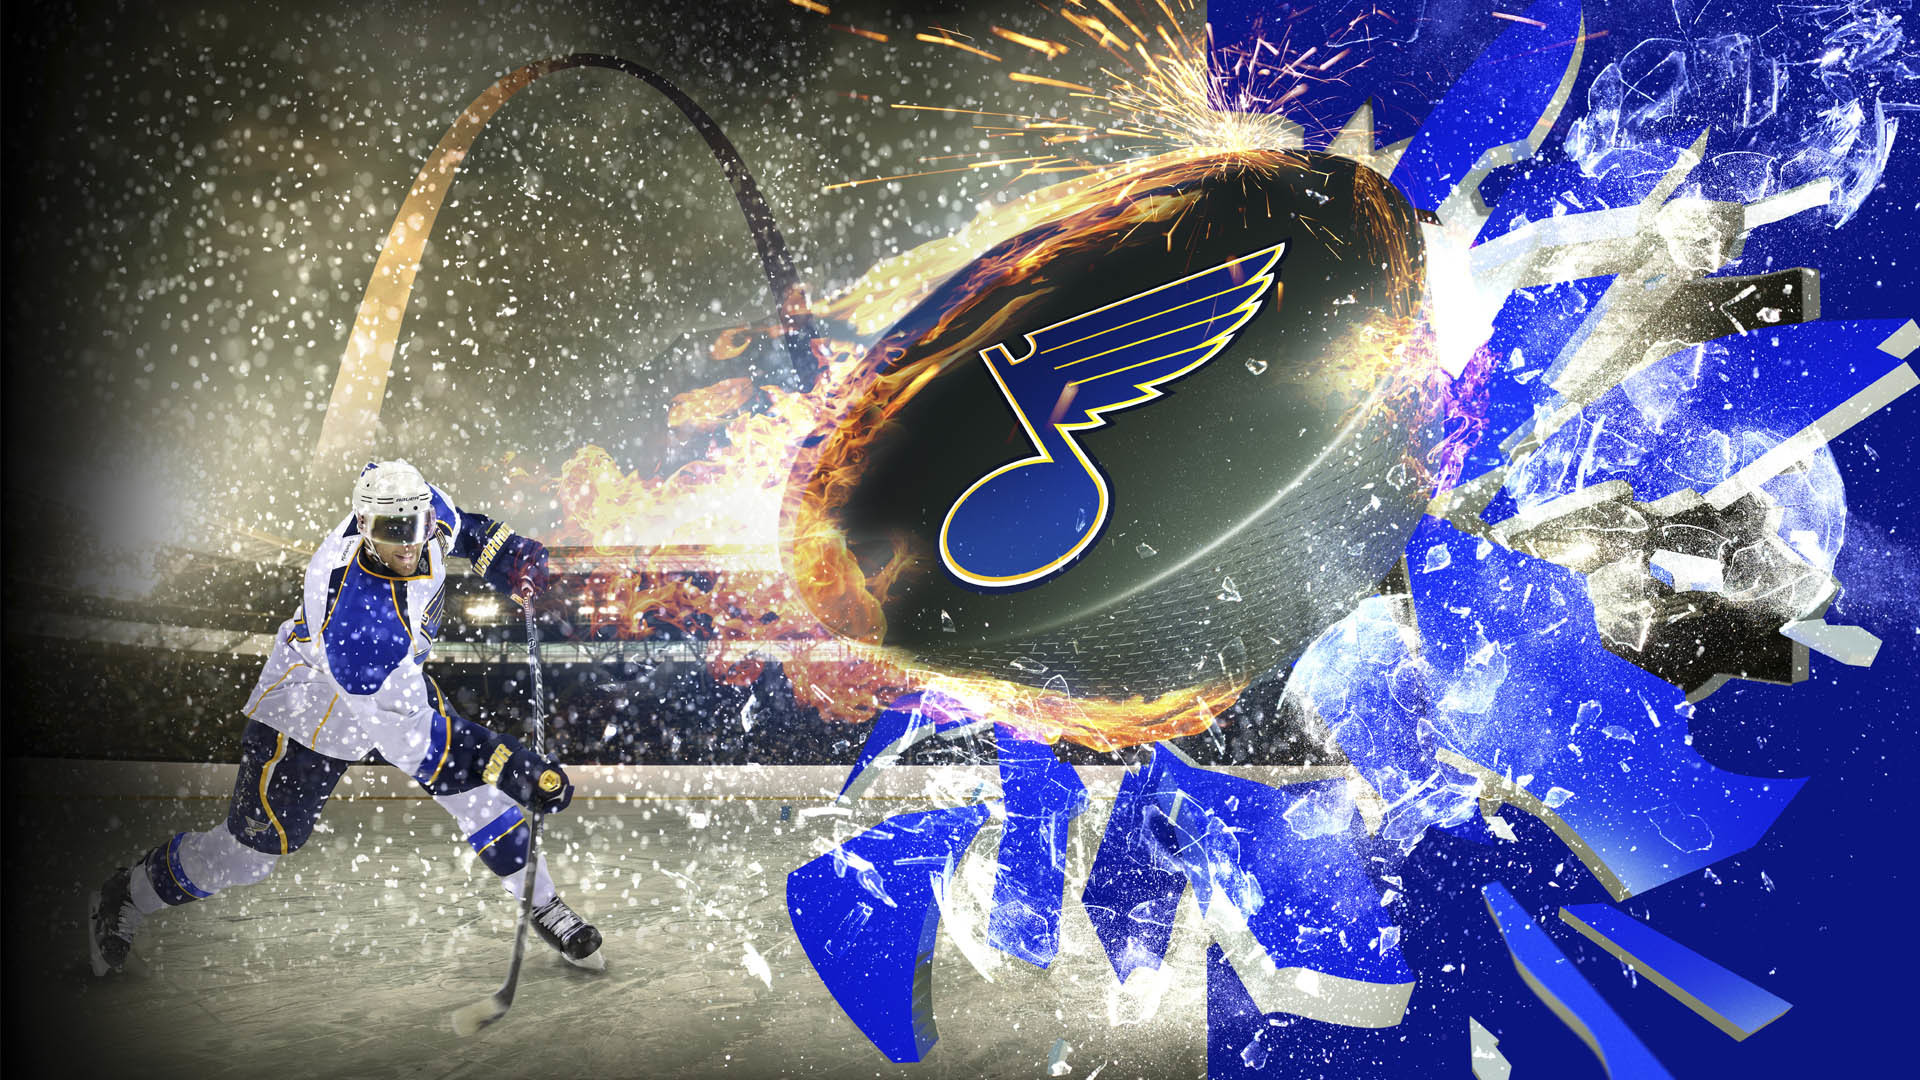 1920x1080 The St. Louis Blues are off to their best start in a long time under head  coach, Mike Yeo. In October, they started the season strong by winning 10  games.